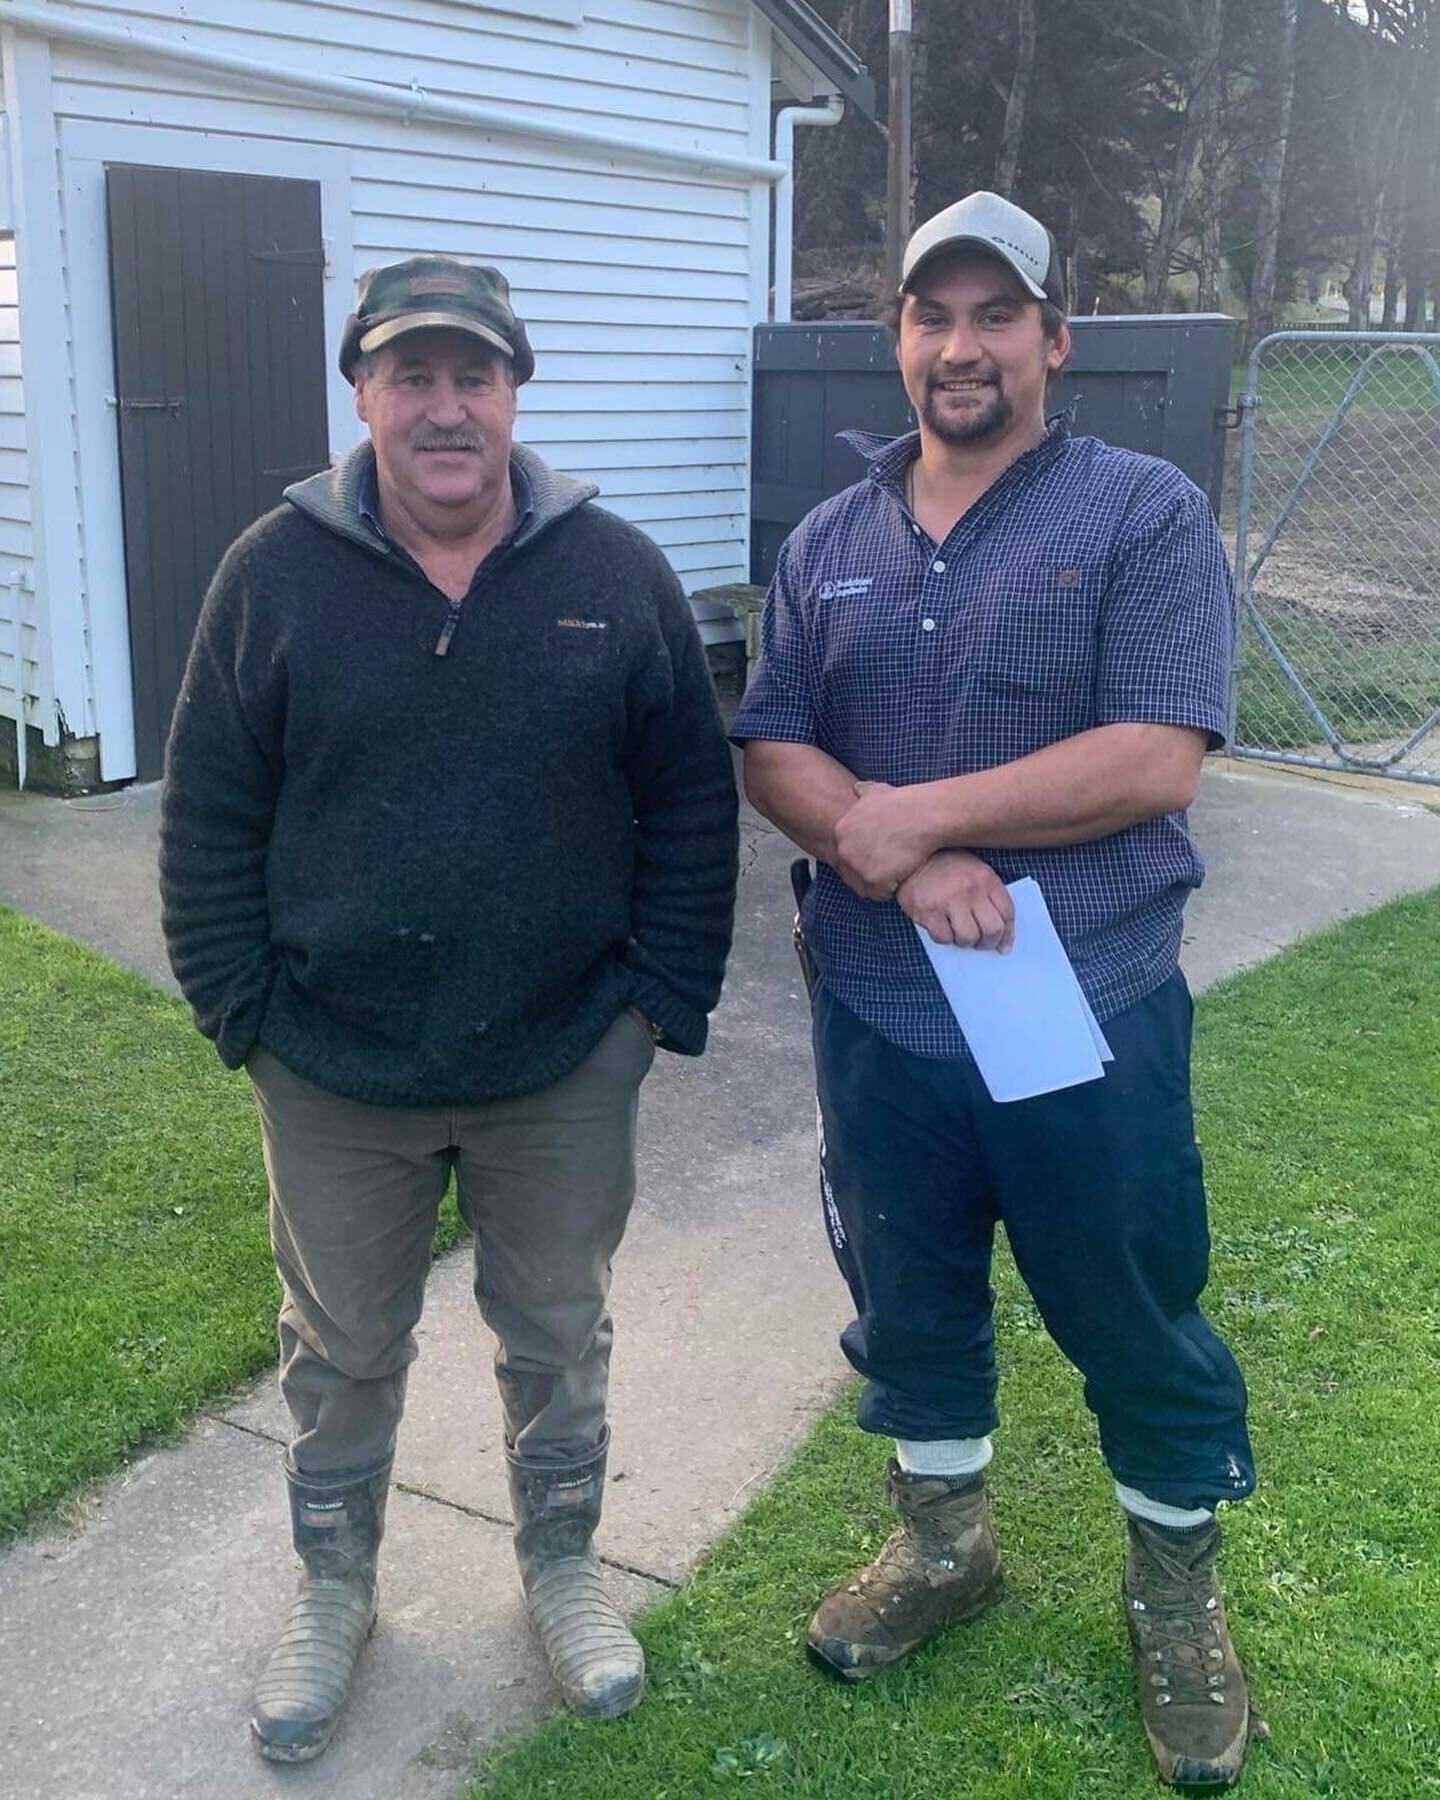 Motukawa - it&rsquo;s another Plimmer &amp; Co farewell and welcome. Farewell to farm manager Kevin Saville after 22 years! Thank you for all you have done and we wish you all the best for your next adventure(s). Welcome to Rimu Wipaki. We&rsquo;re t